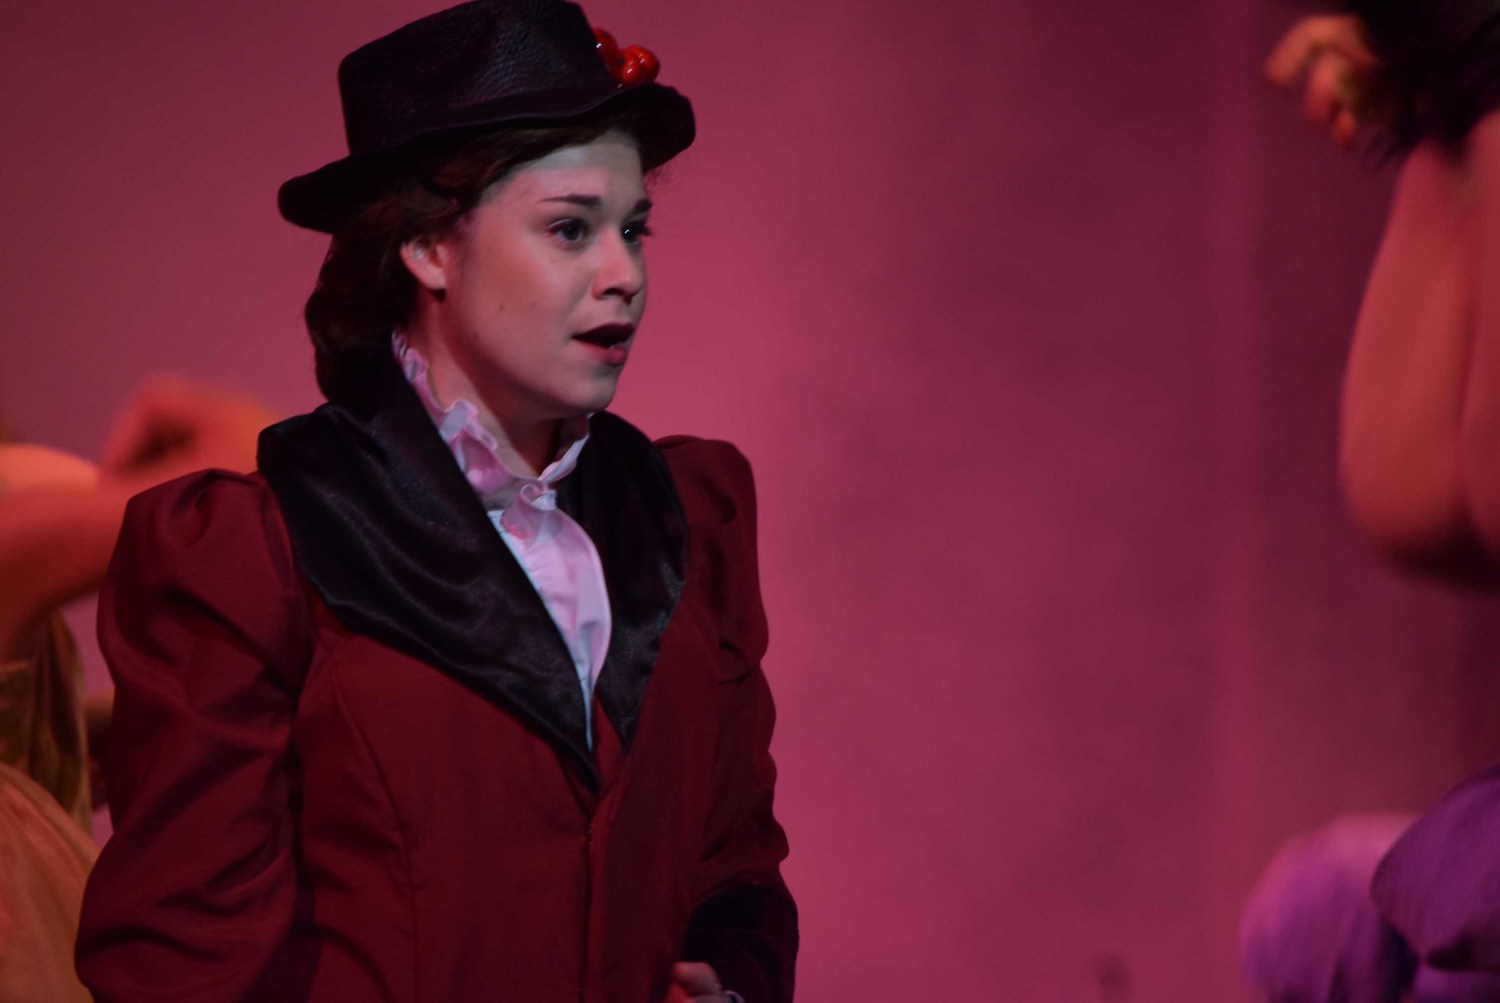 Enclosed are production photos from the CSC production of Mary Poppins.